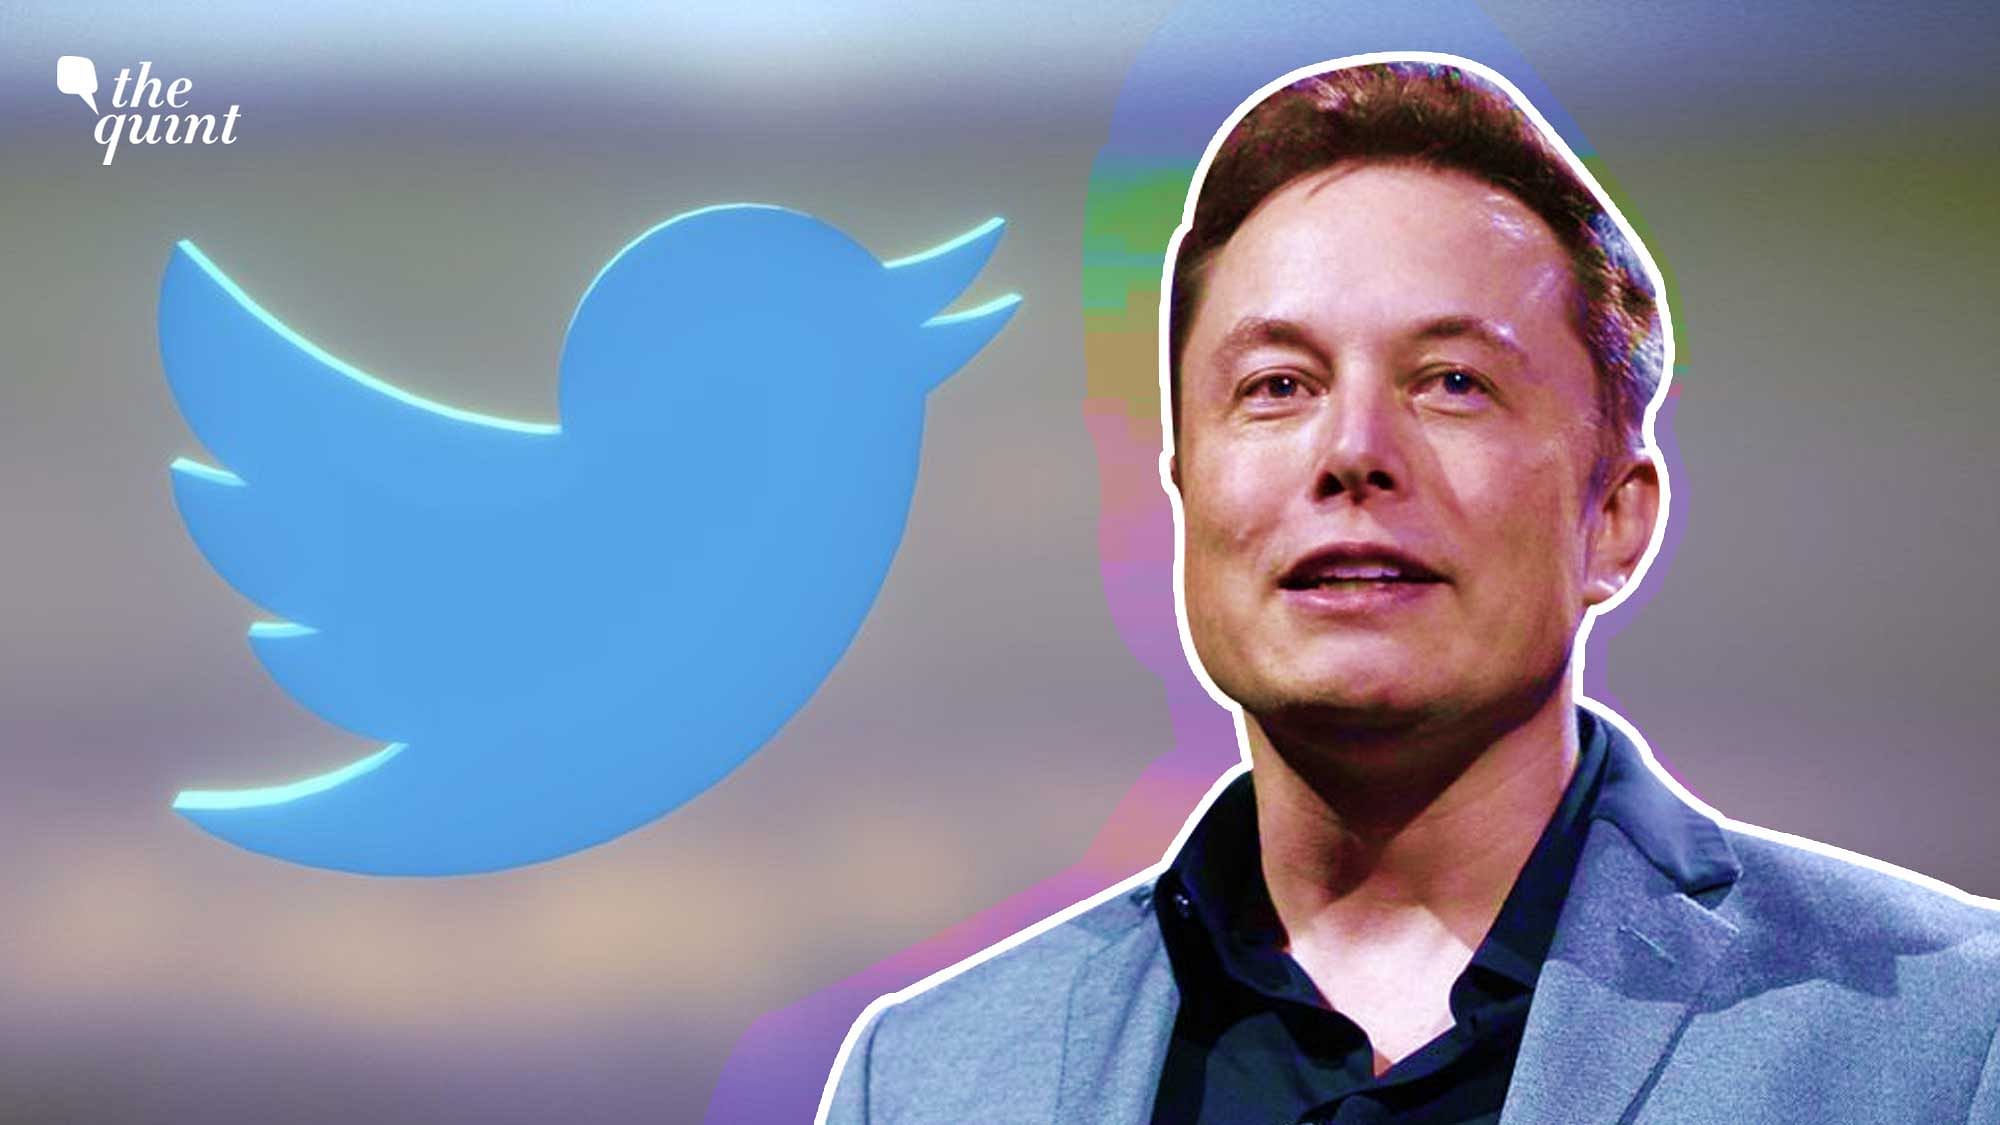 <div class="paragraphs"><p>The fishbowl drama featuring billionaire Elon Musk and social media company Twitter saw another jerk-and-dart motion last week when Musk revealed that he wants to follow through with his purchase of Twitter after all.</p></div>